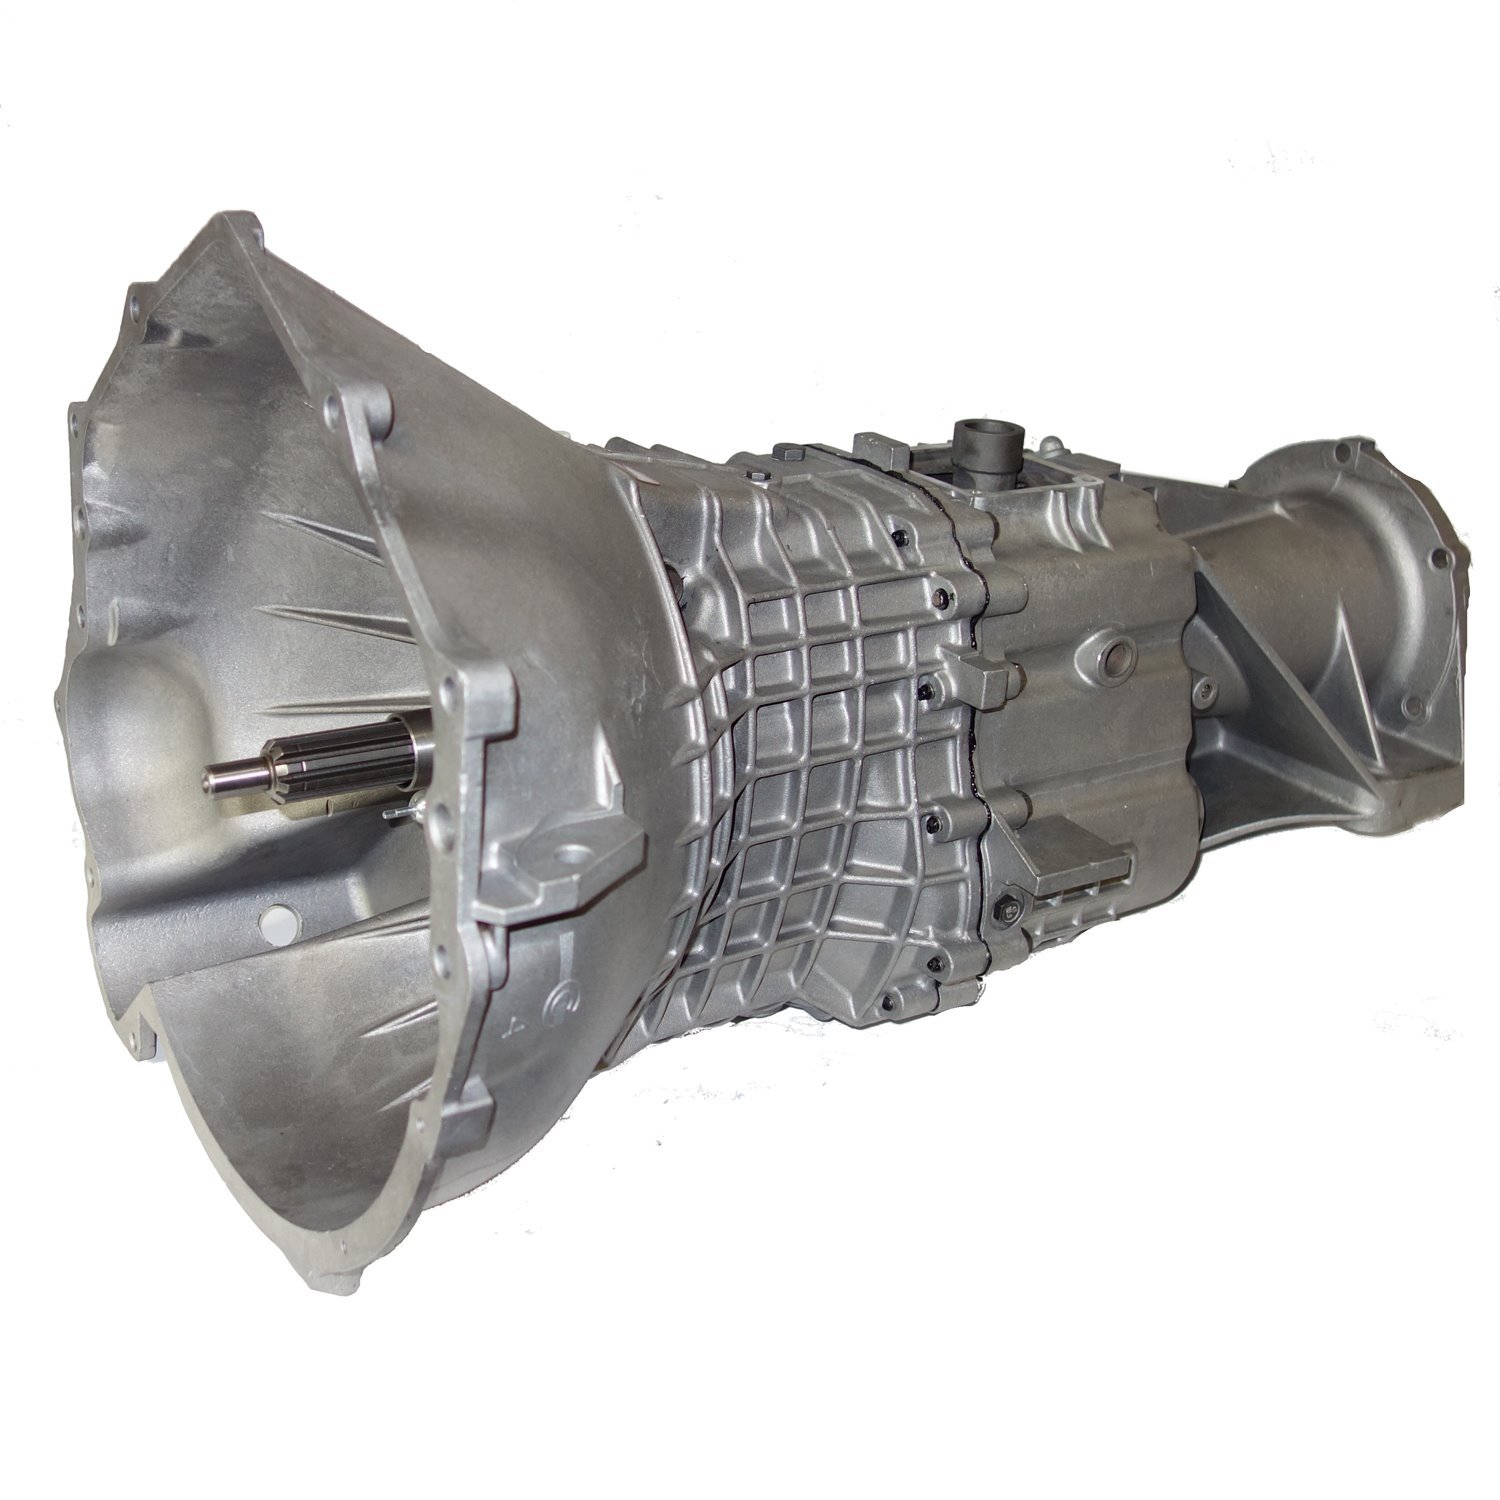 Remanufactured NV3500 Manual Transmission for GM 93-95 S10, S15 & Sonoma, 4.3L, 4x4, 5 Speed